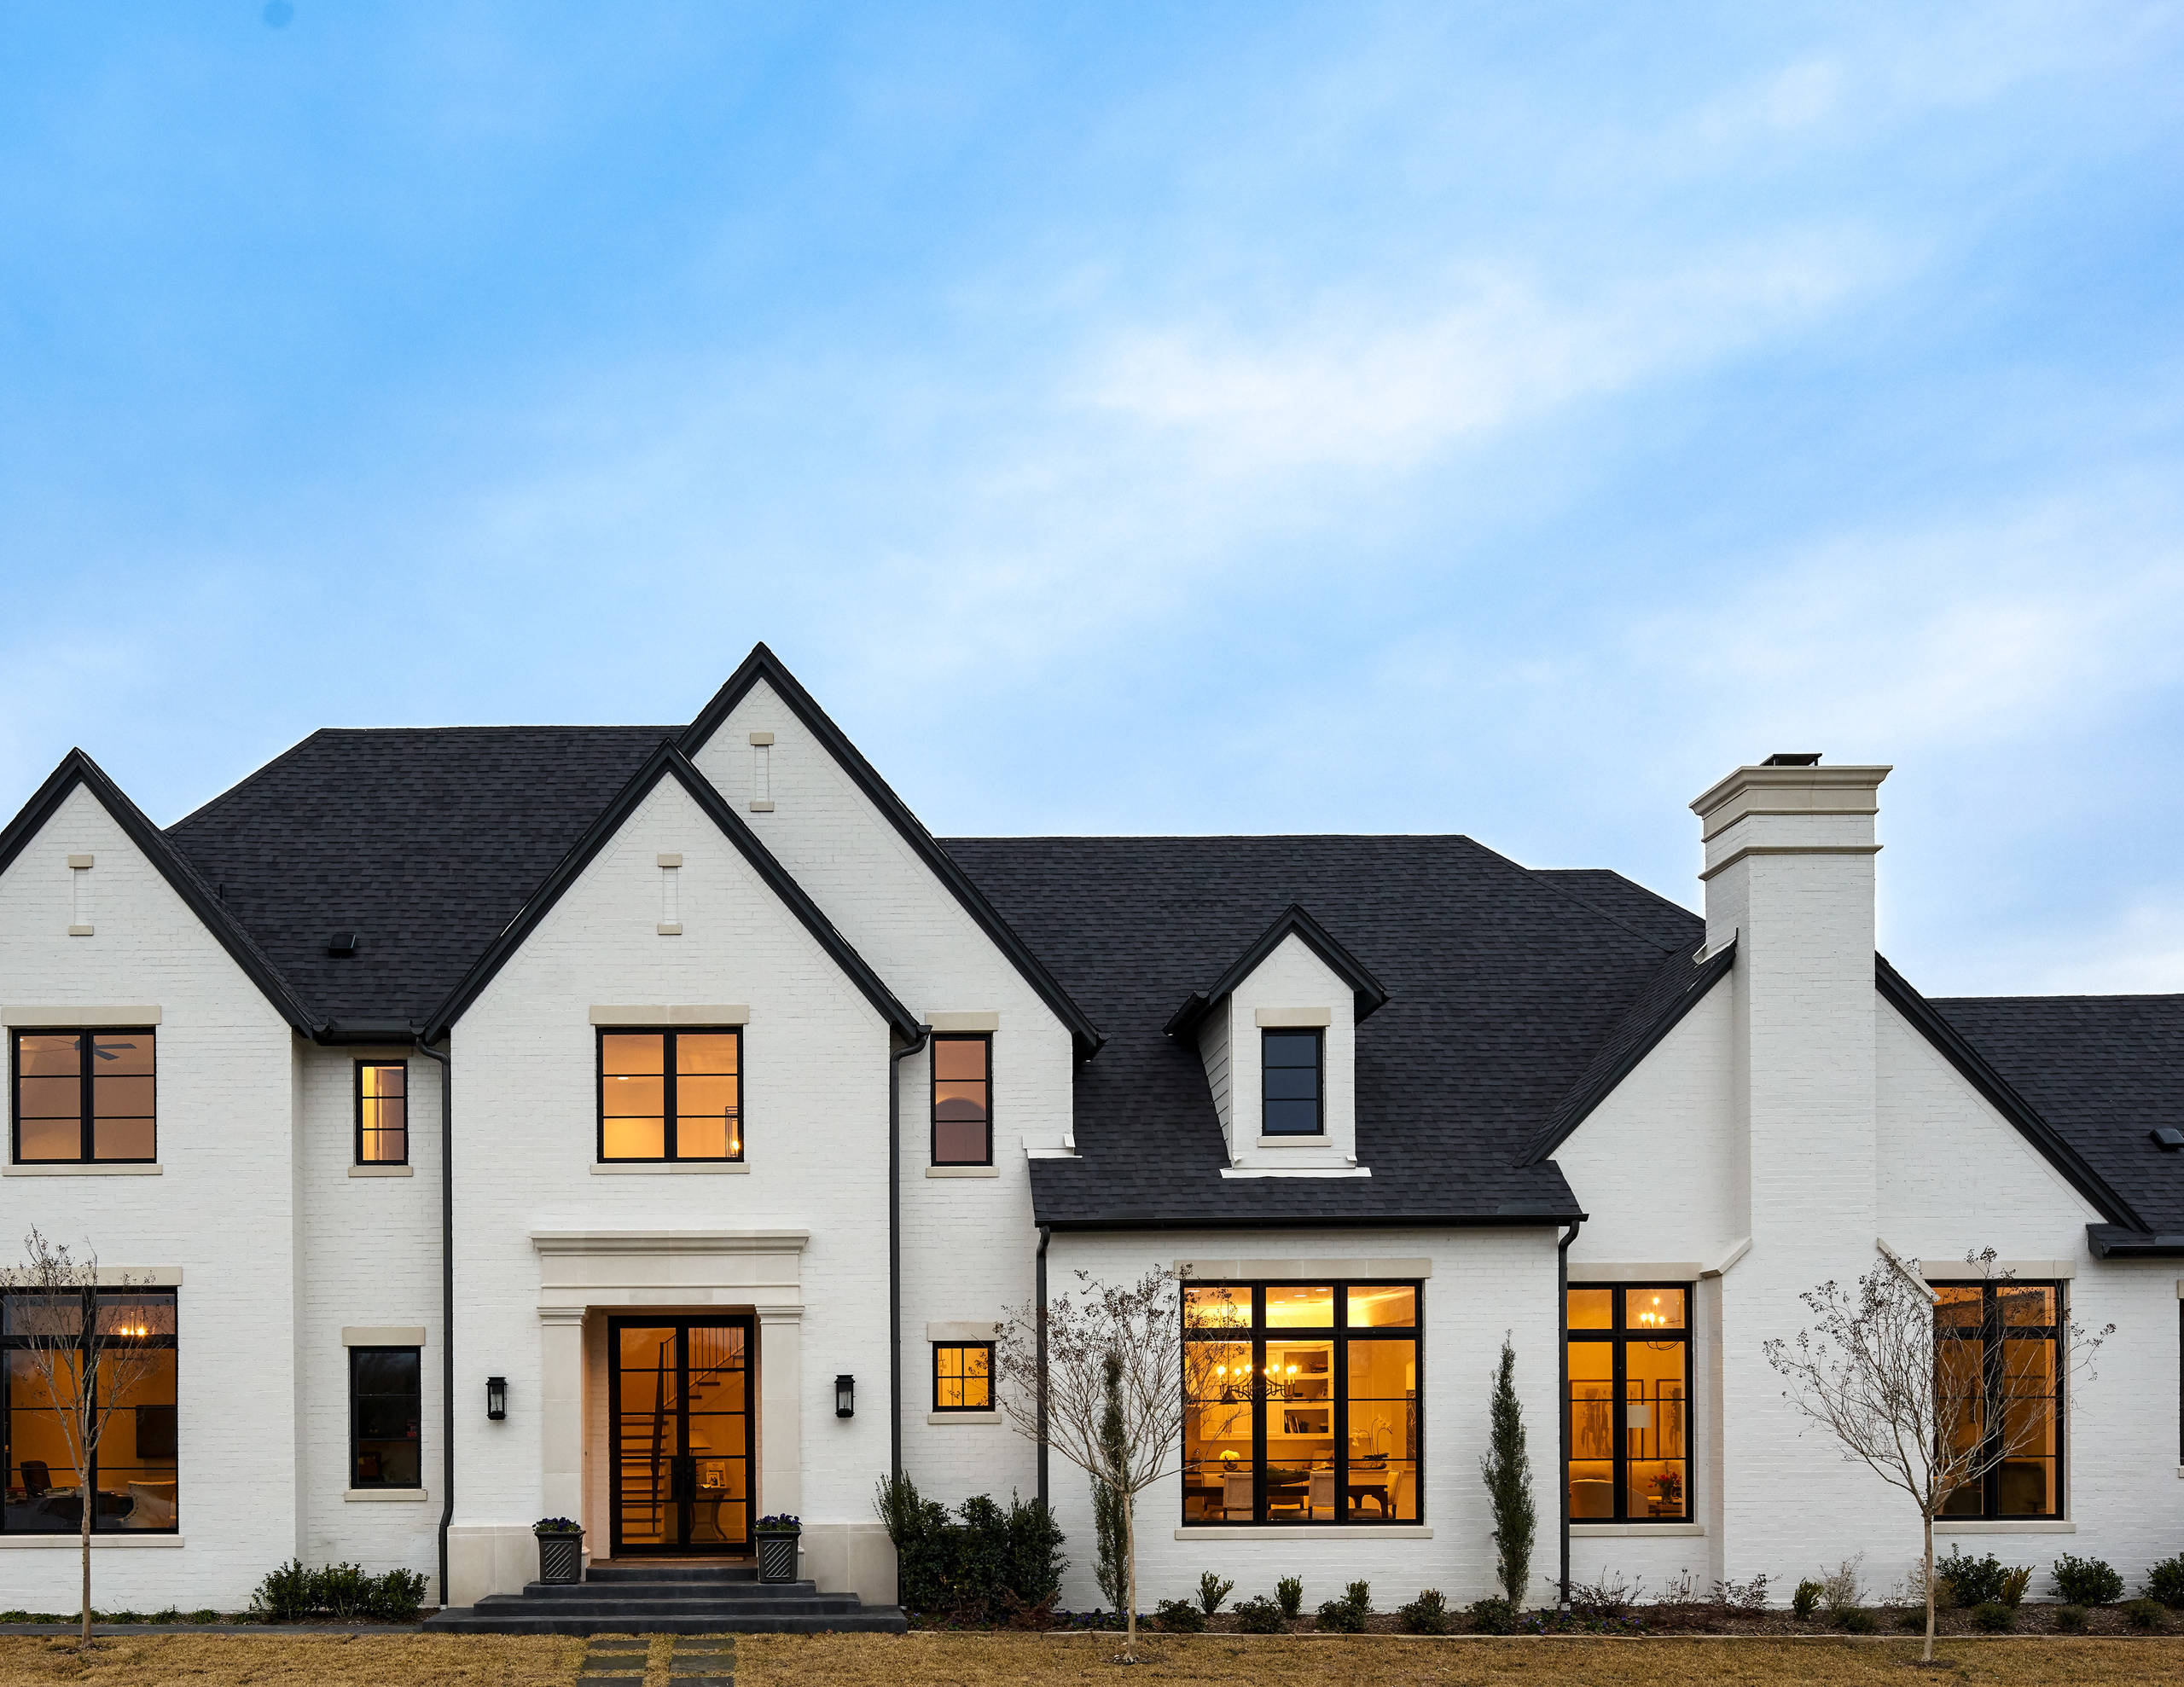 75 Beautiful White Brick Exterior Home Pictures Ideas July 21 Houzz